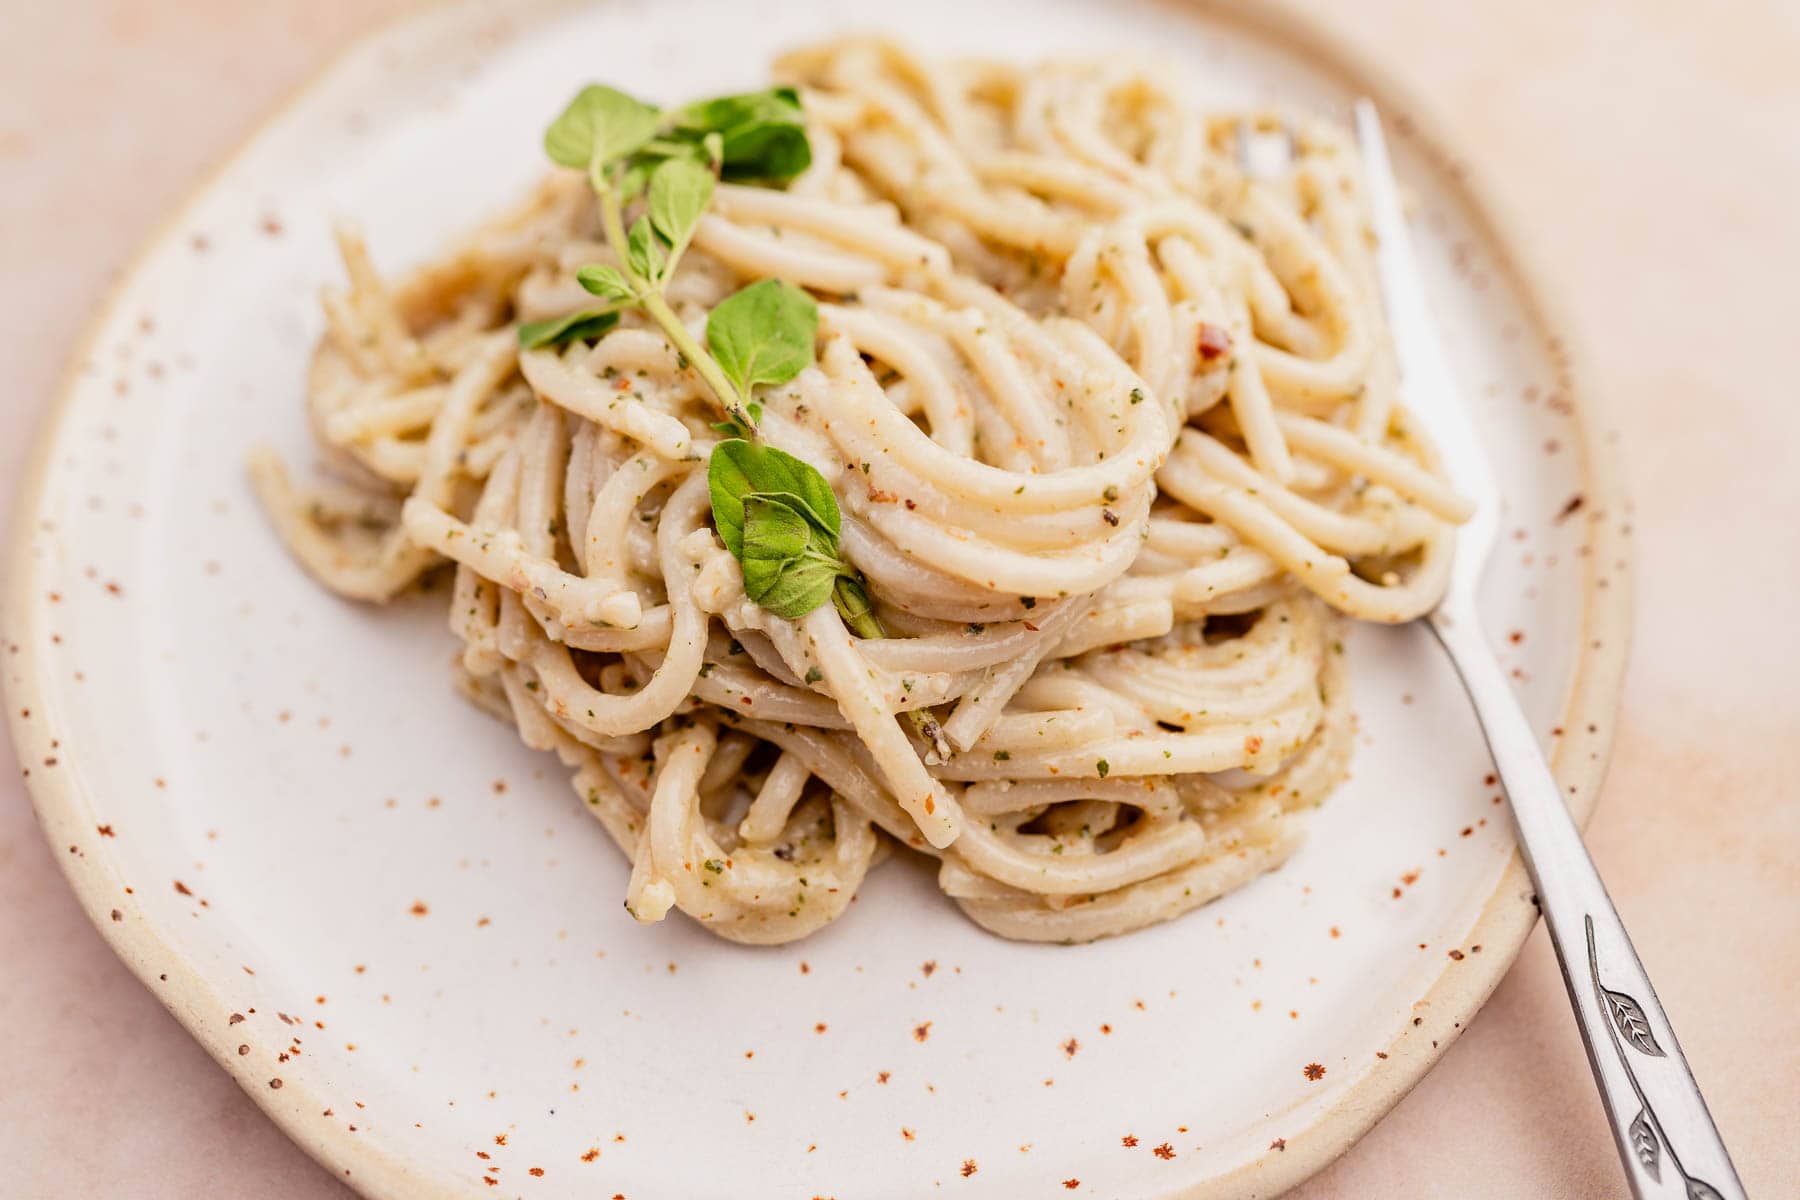 A silver fork rests on a plate of oregano pesto pasta.